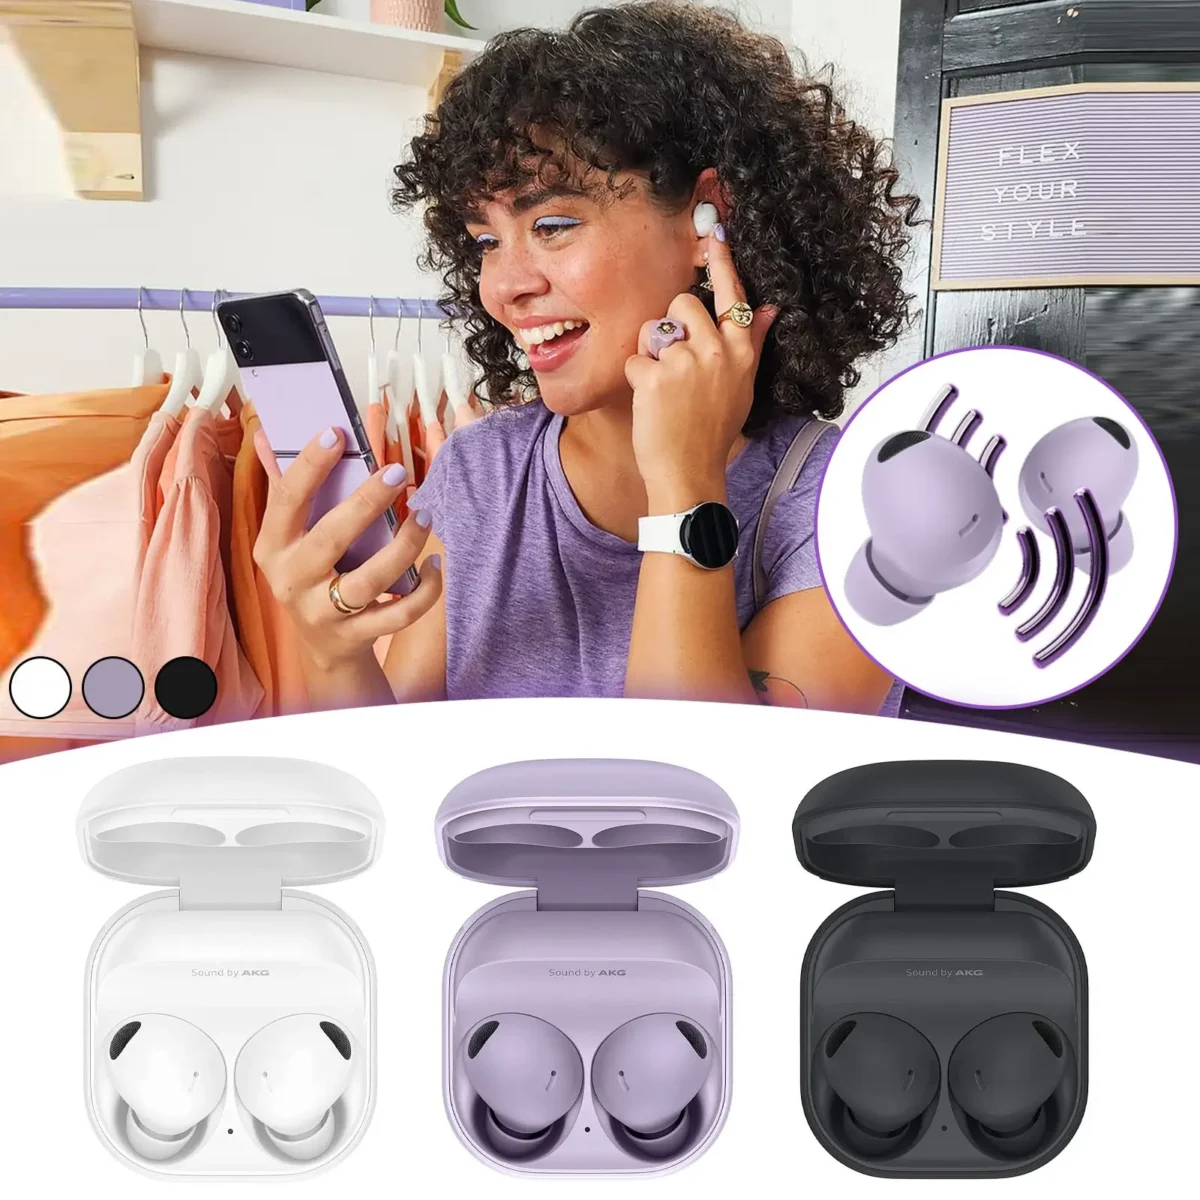 Girl calling with Samsung galaxy buds 2